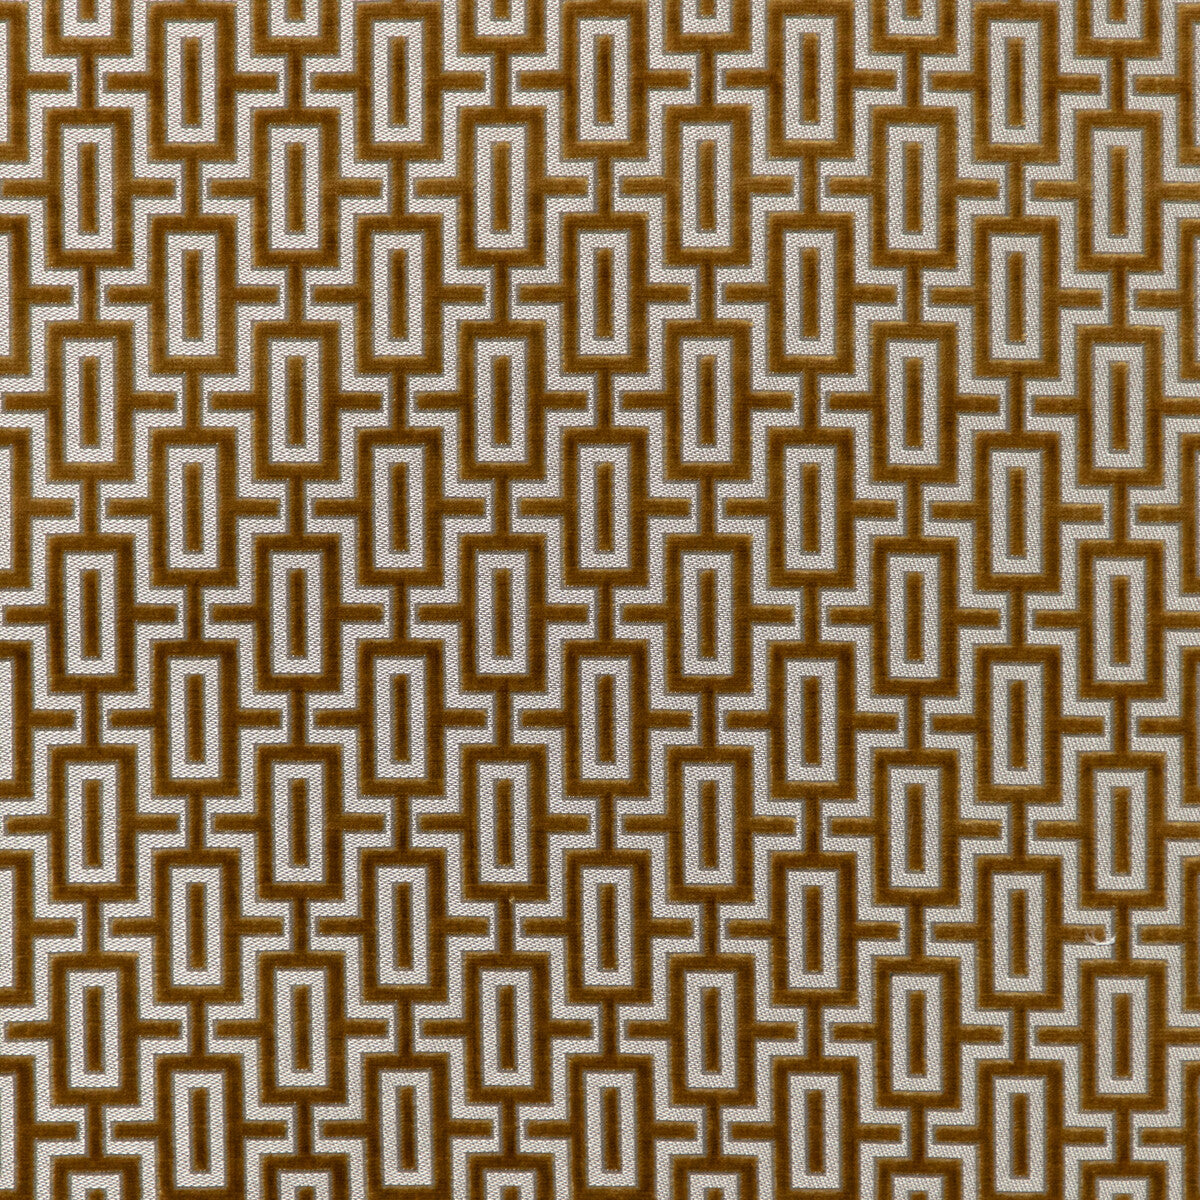 Joyride fabric in amber color - pattern 37286.6.0 - by Kravet Contract in the Happy Hour collection